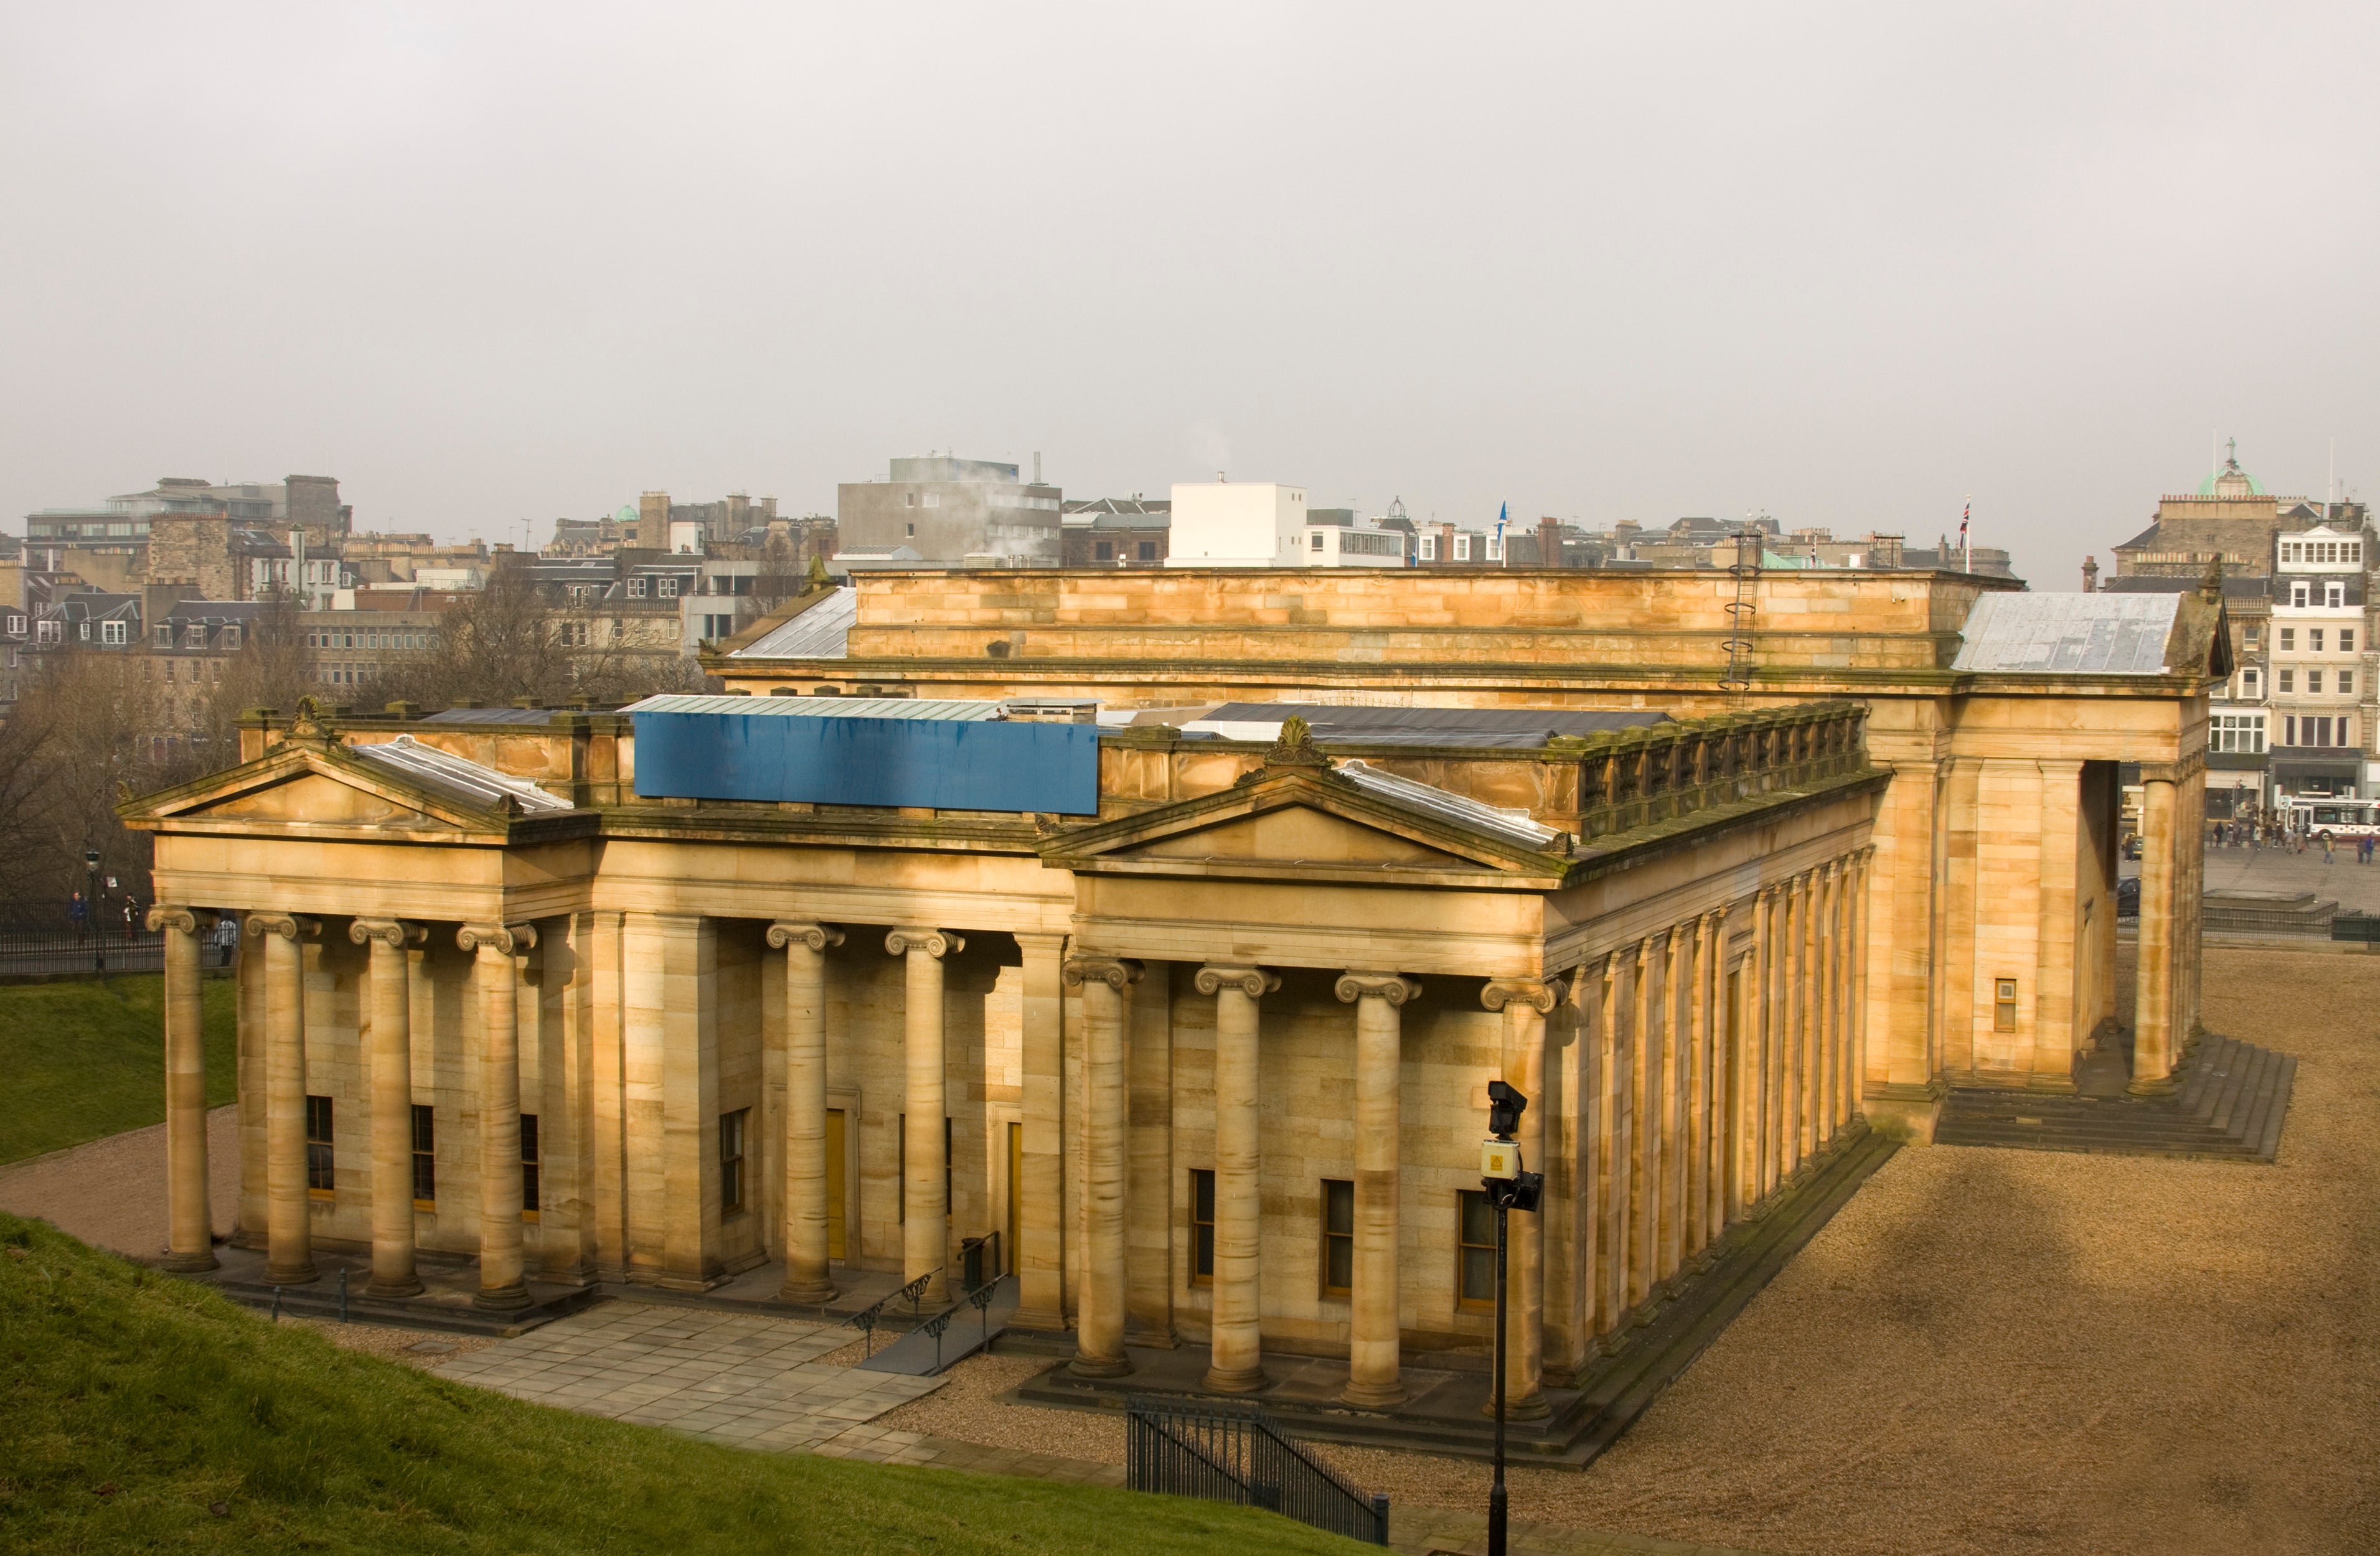 The National Museum of Scotland reported six items were lost from its collections, one item was stolen and another destroyed in a fire